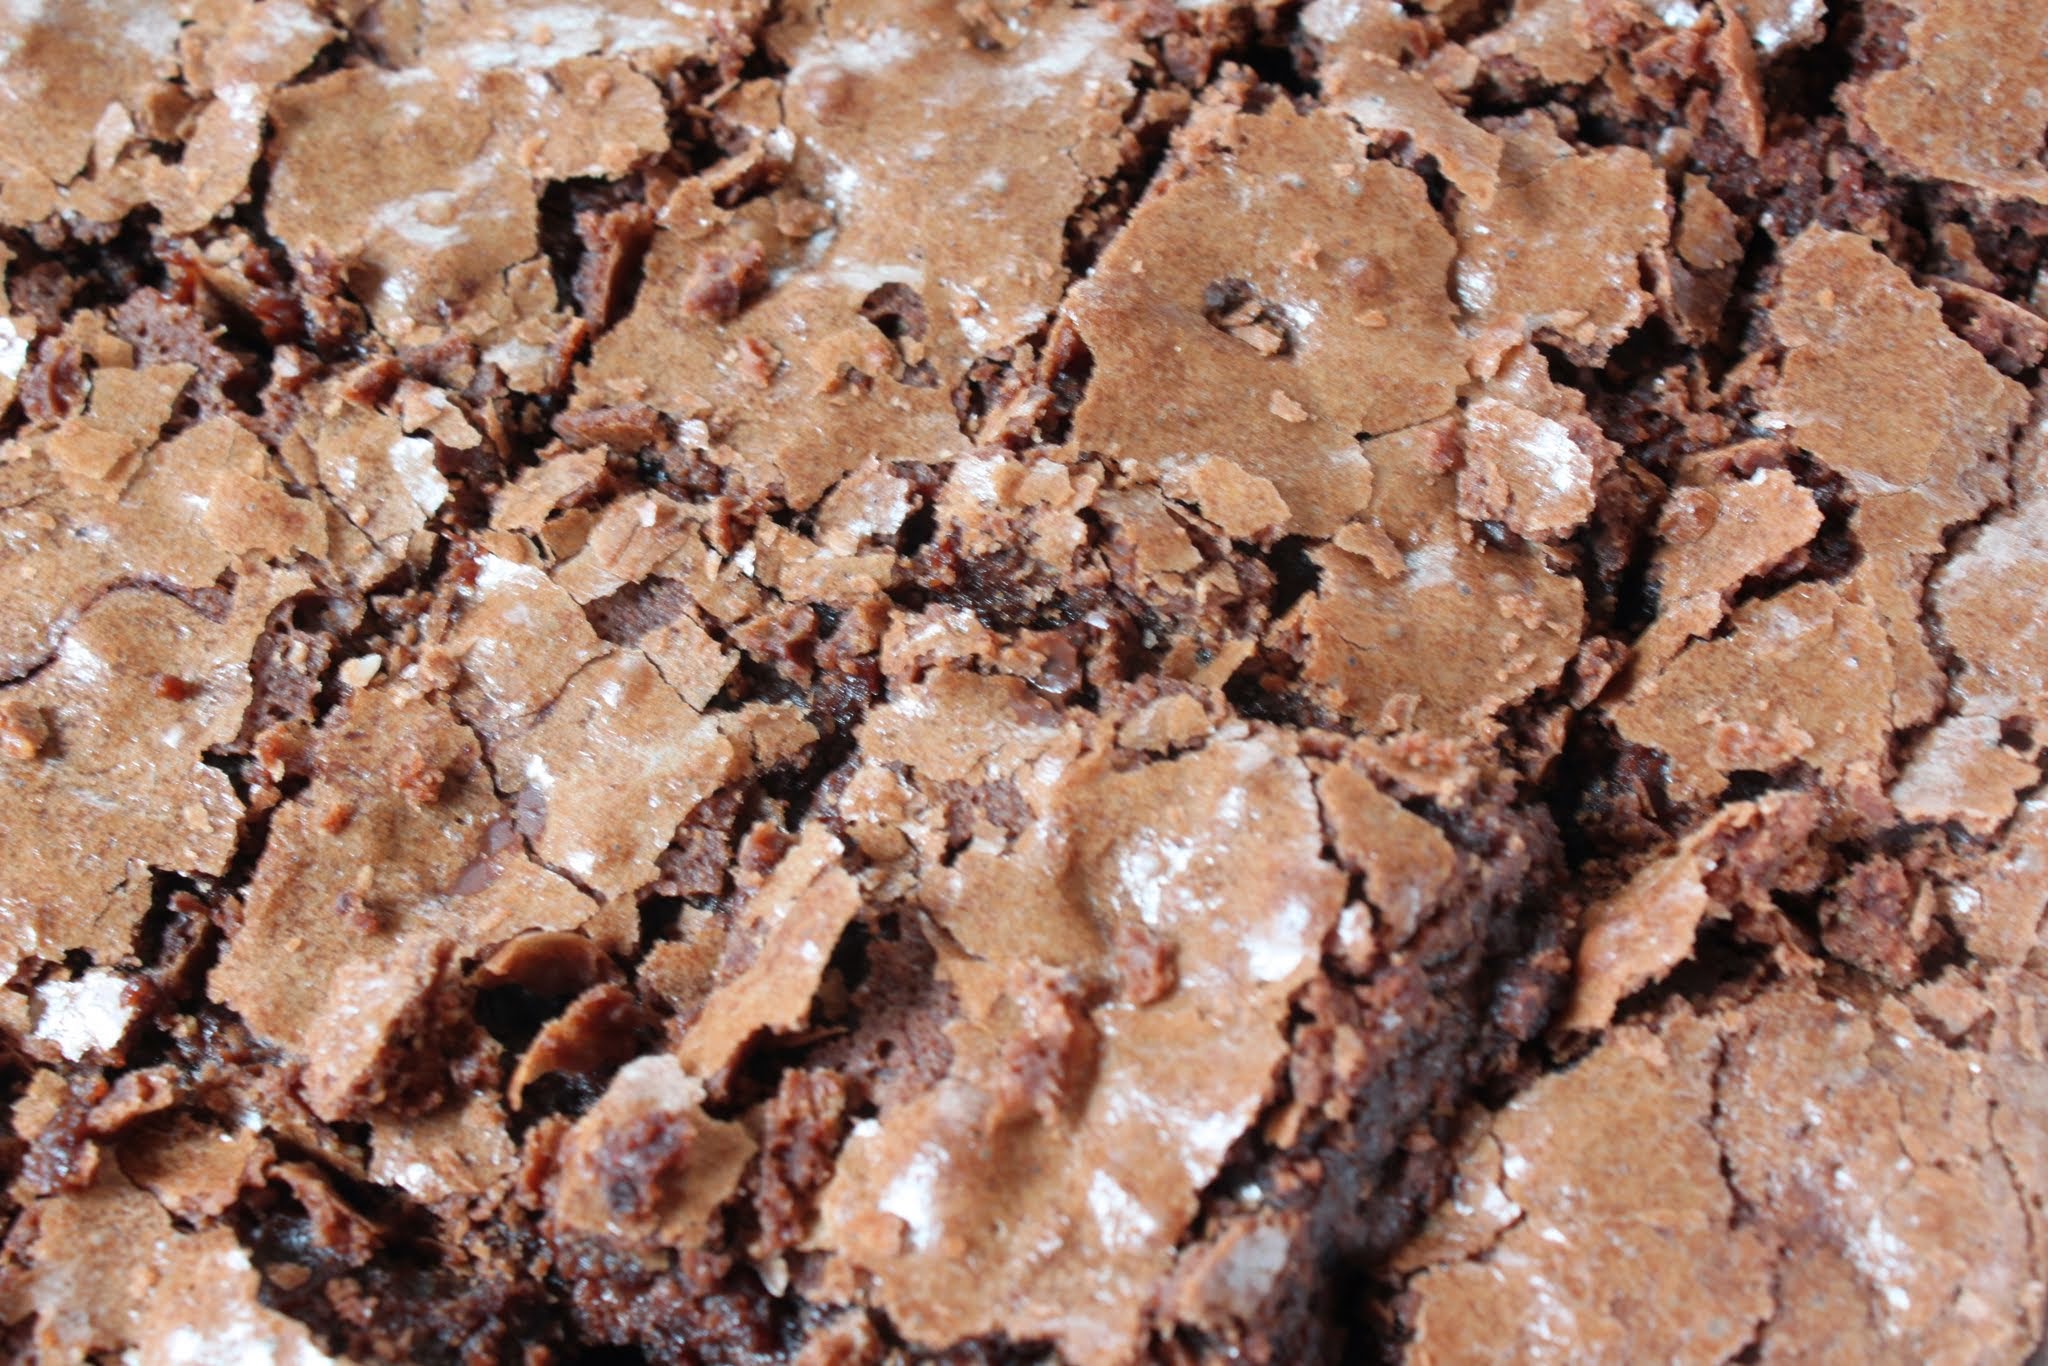 Fudgy Passover Brownies